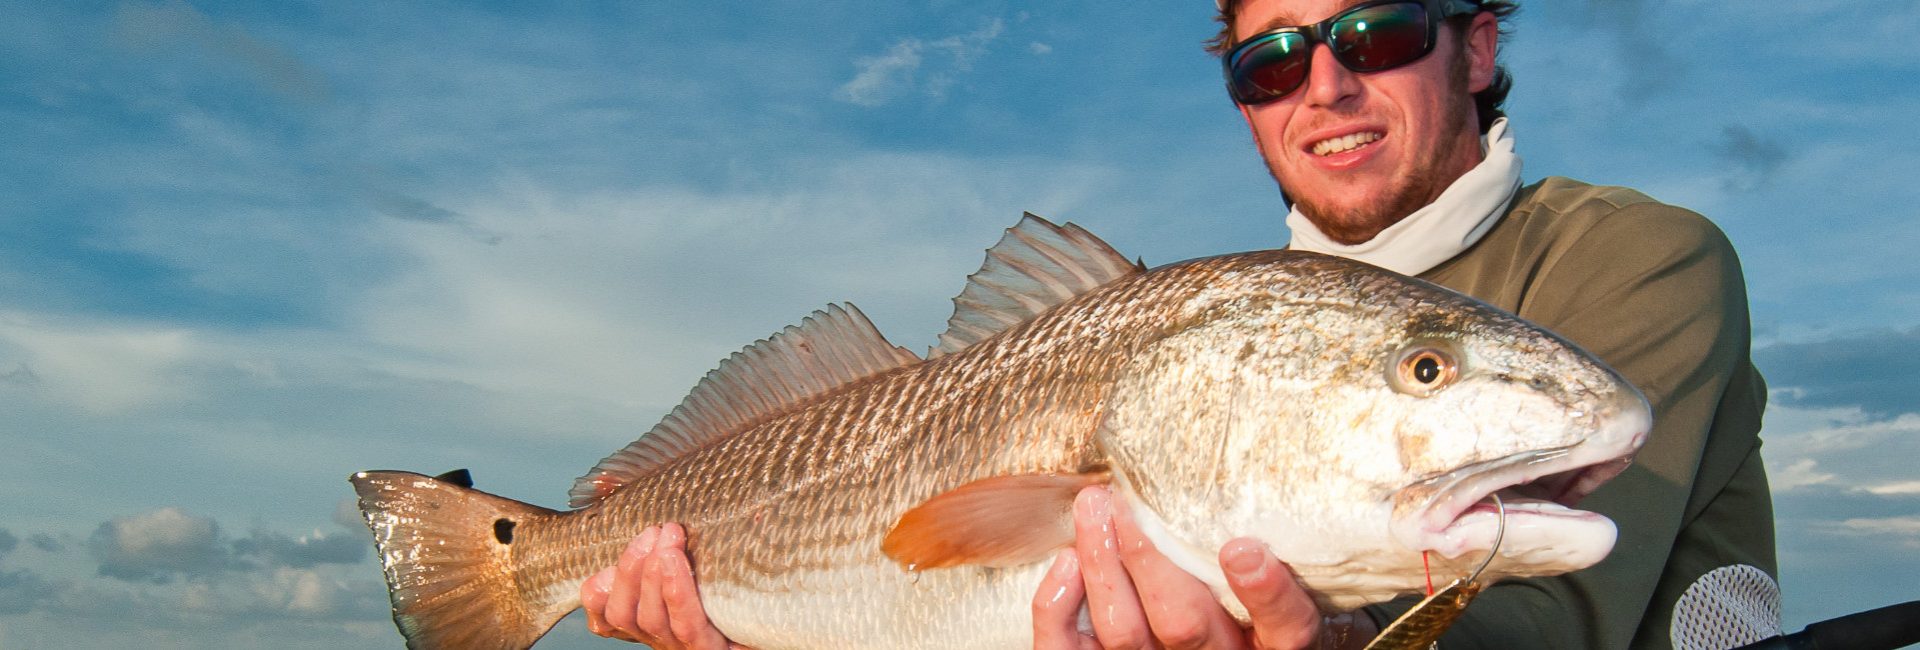 Fishing Charters St Island Outfitters Florida